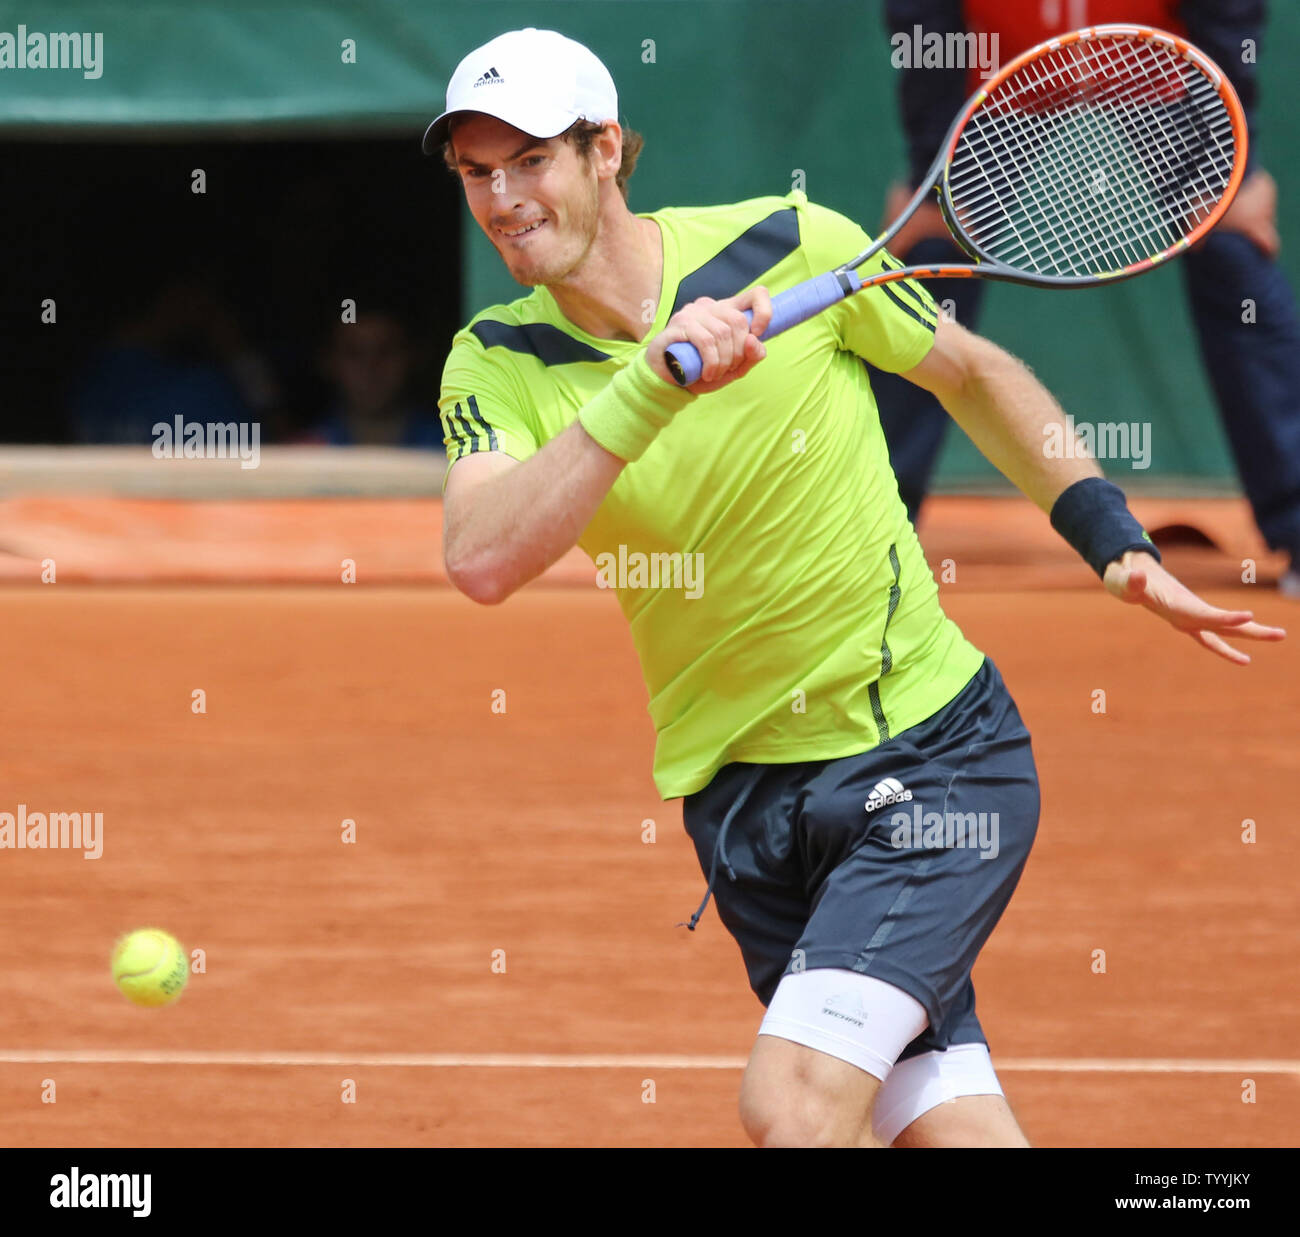 Andy Murray of Great Britain hits a shot during his French Open men's third  round match against Philipp Kohlschreiber of Germany at Roland Garros in  Paris on June 1, 2014. Murray defeated